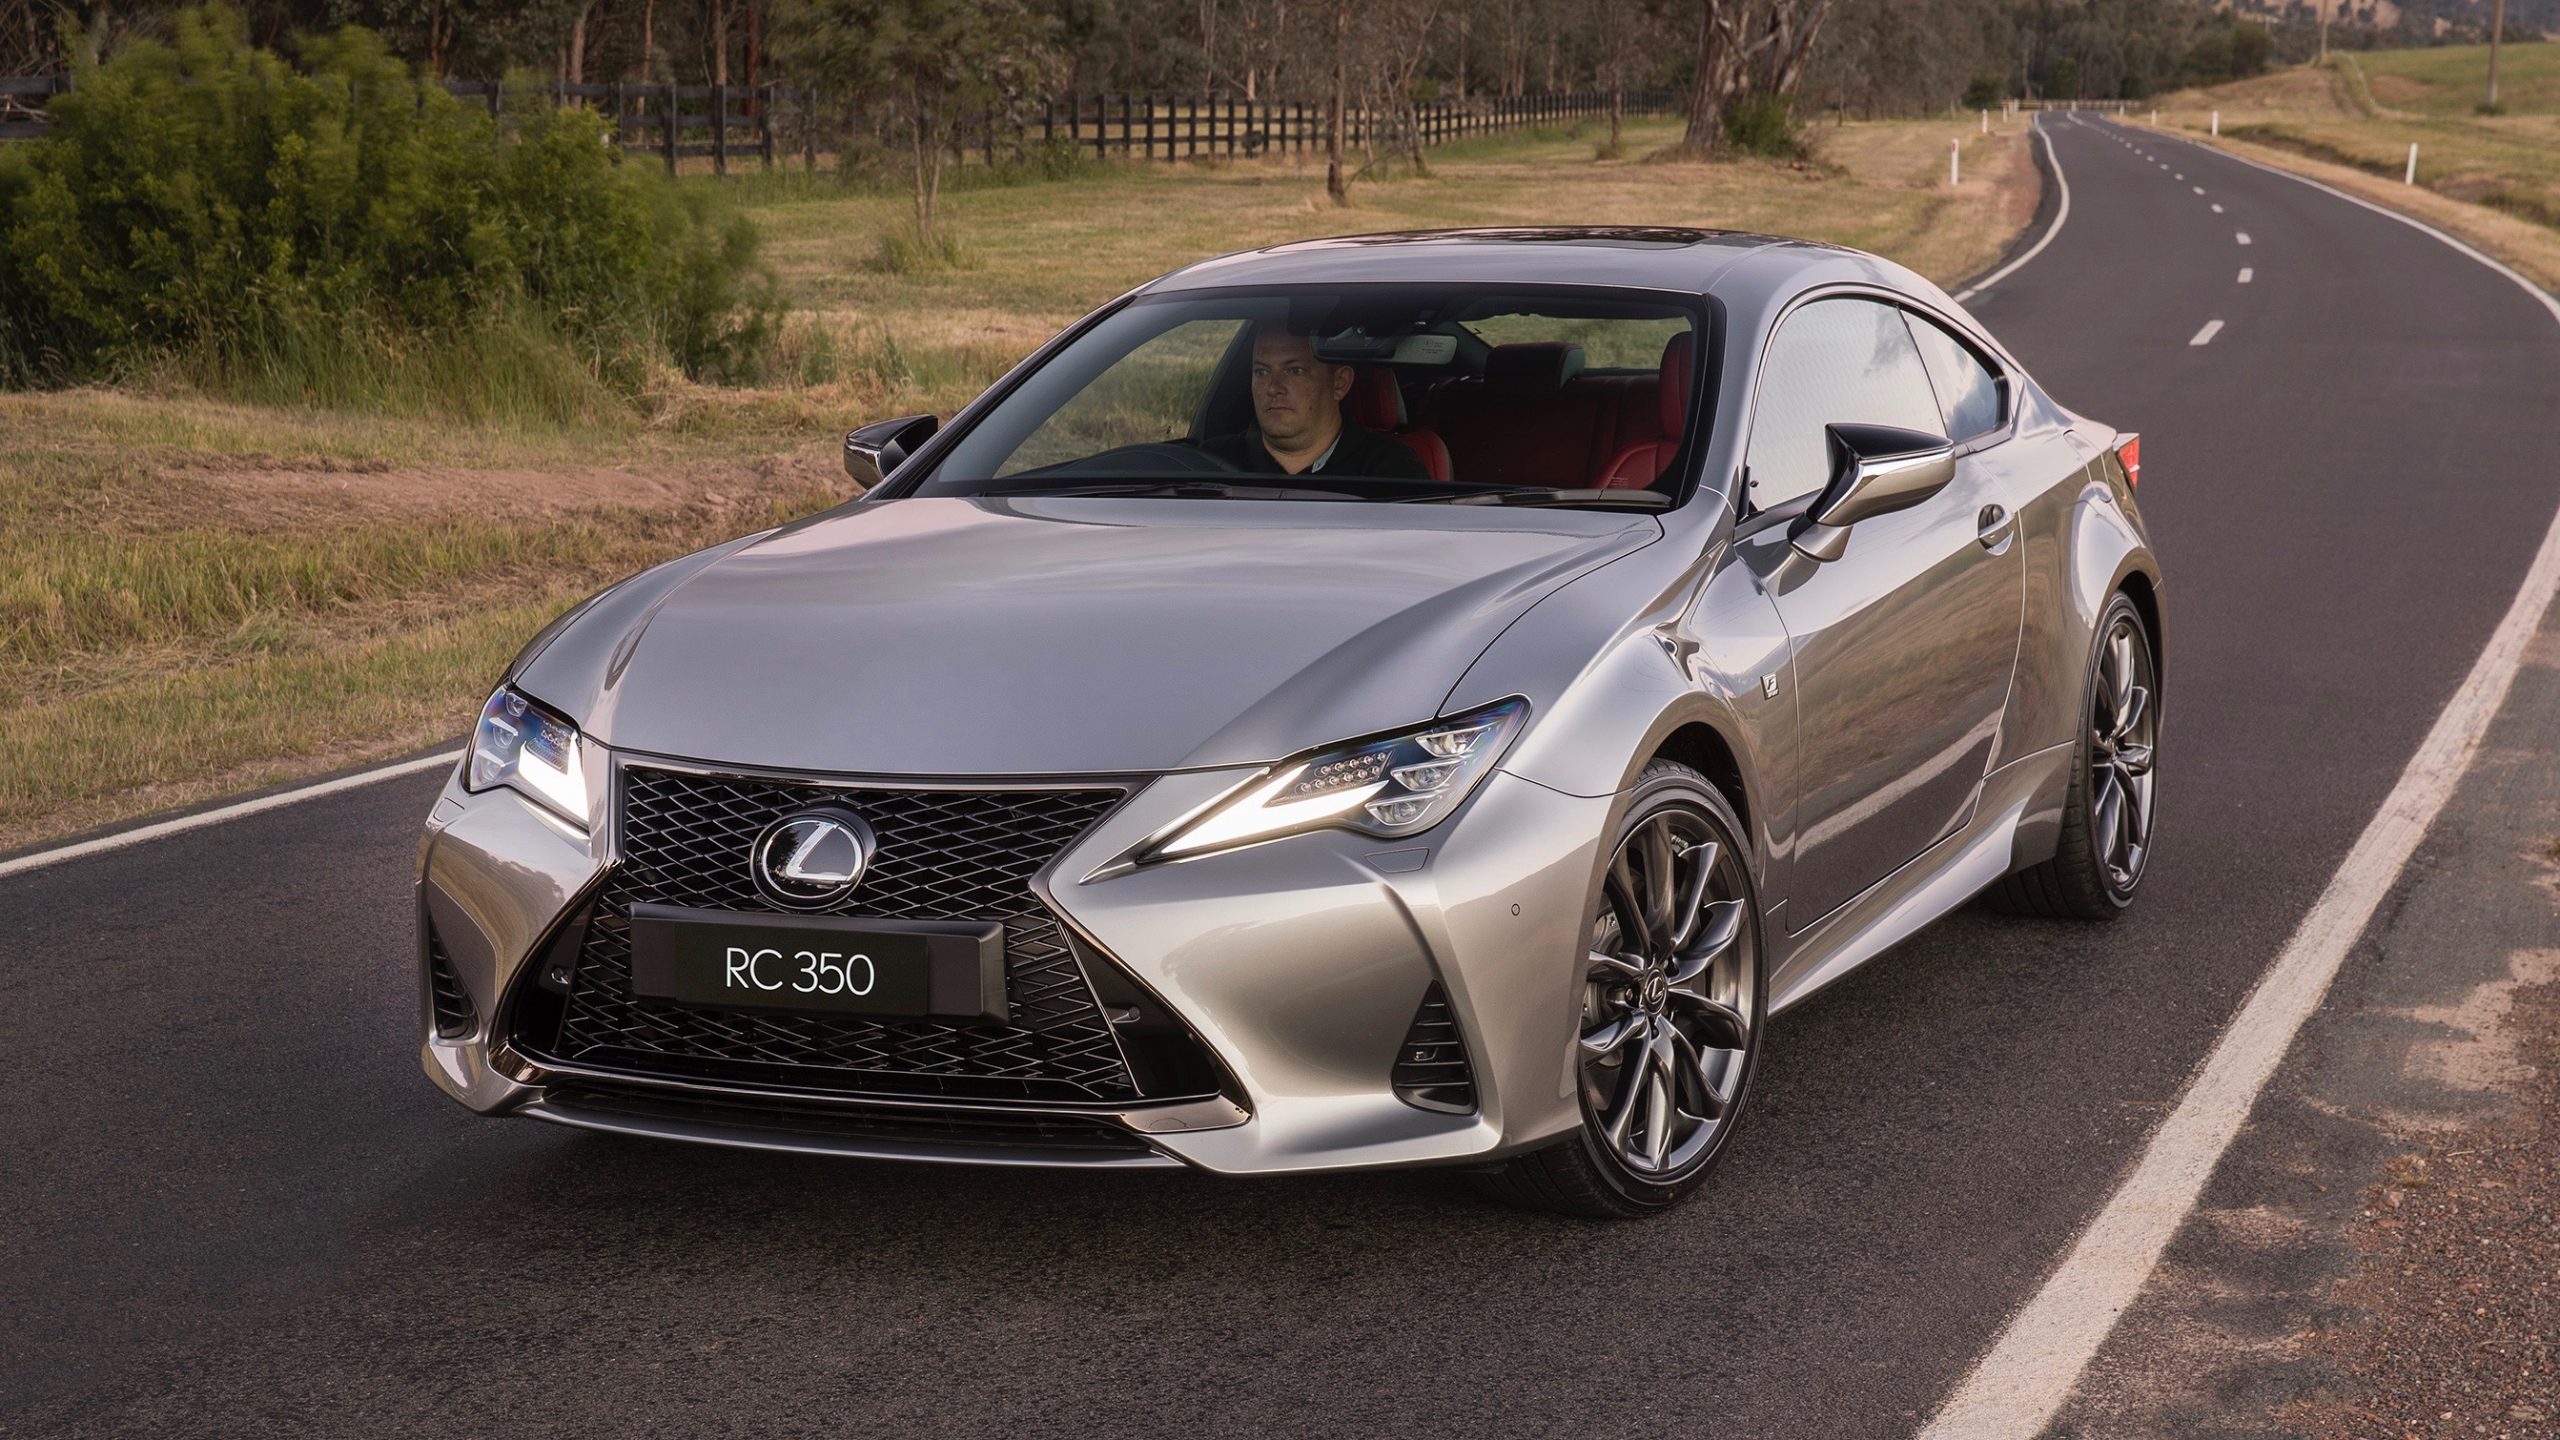 2019 Lexus RC facelift on sale in Australia - Chasing Cars